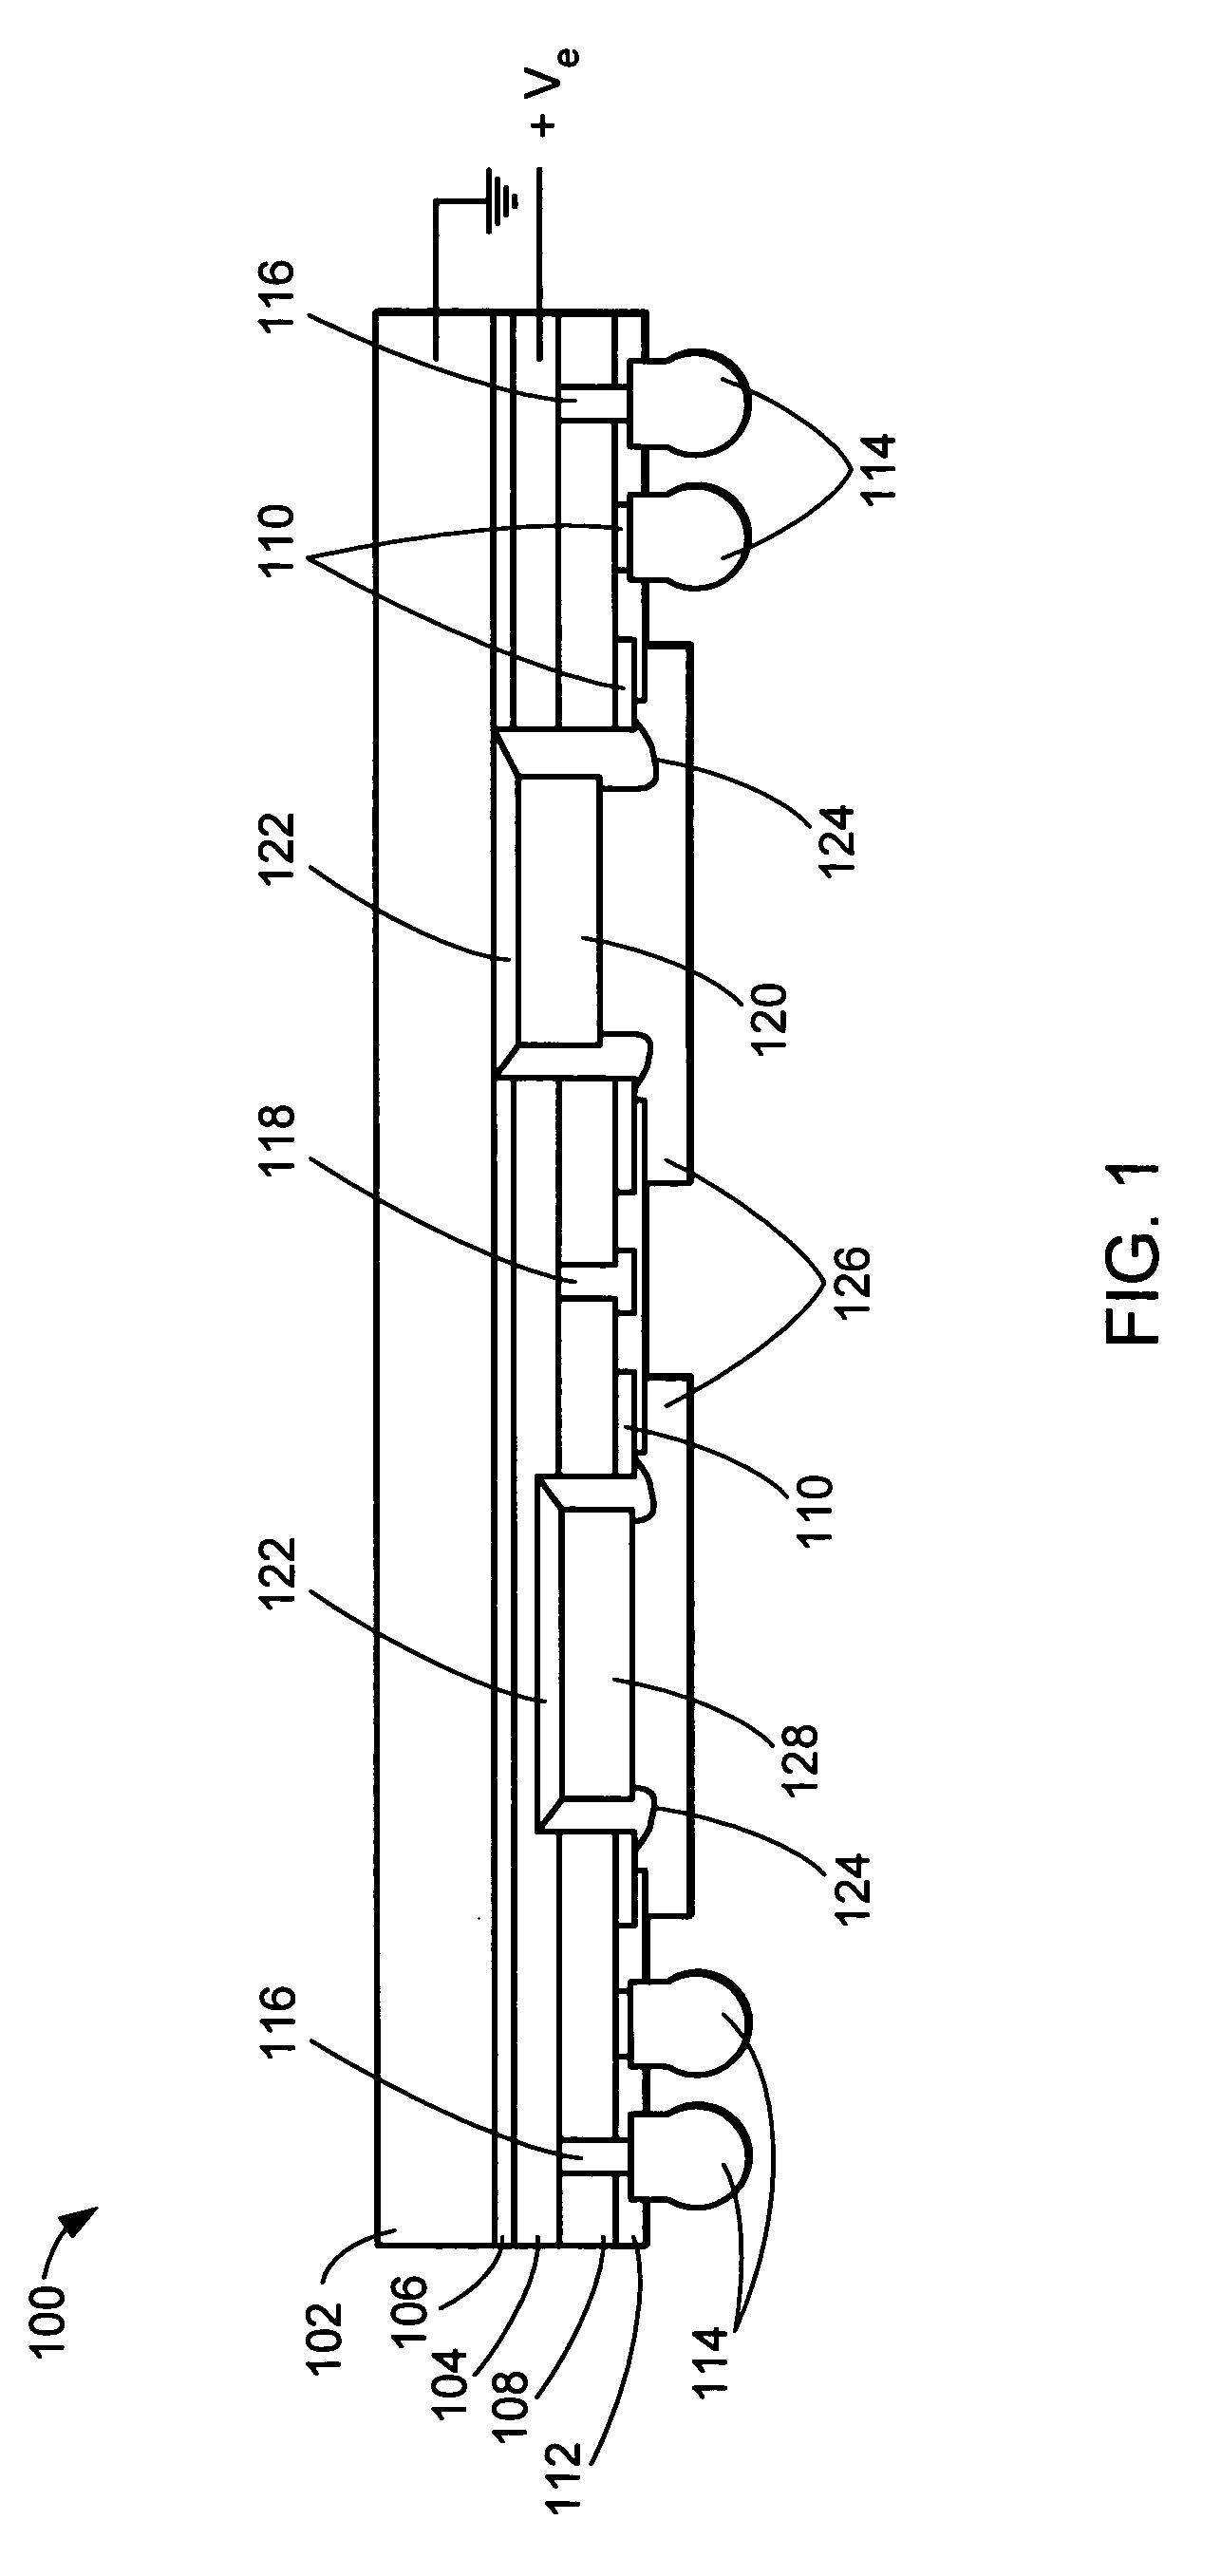 Multichip module package and fabrication method